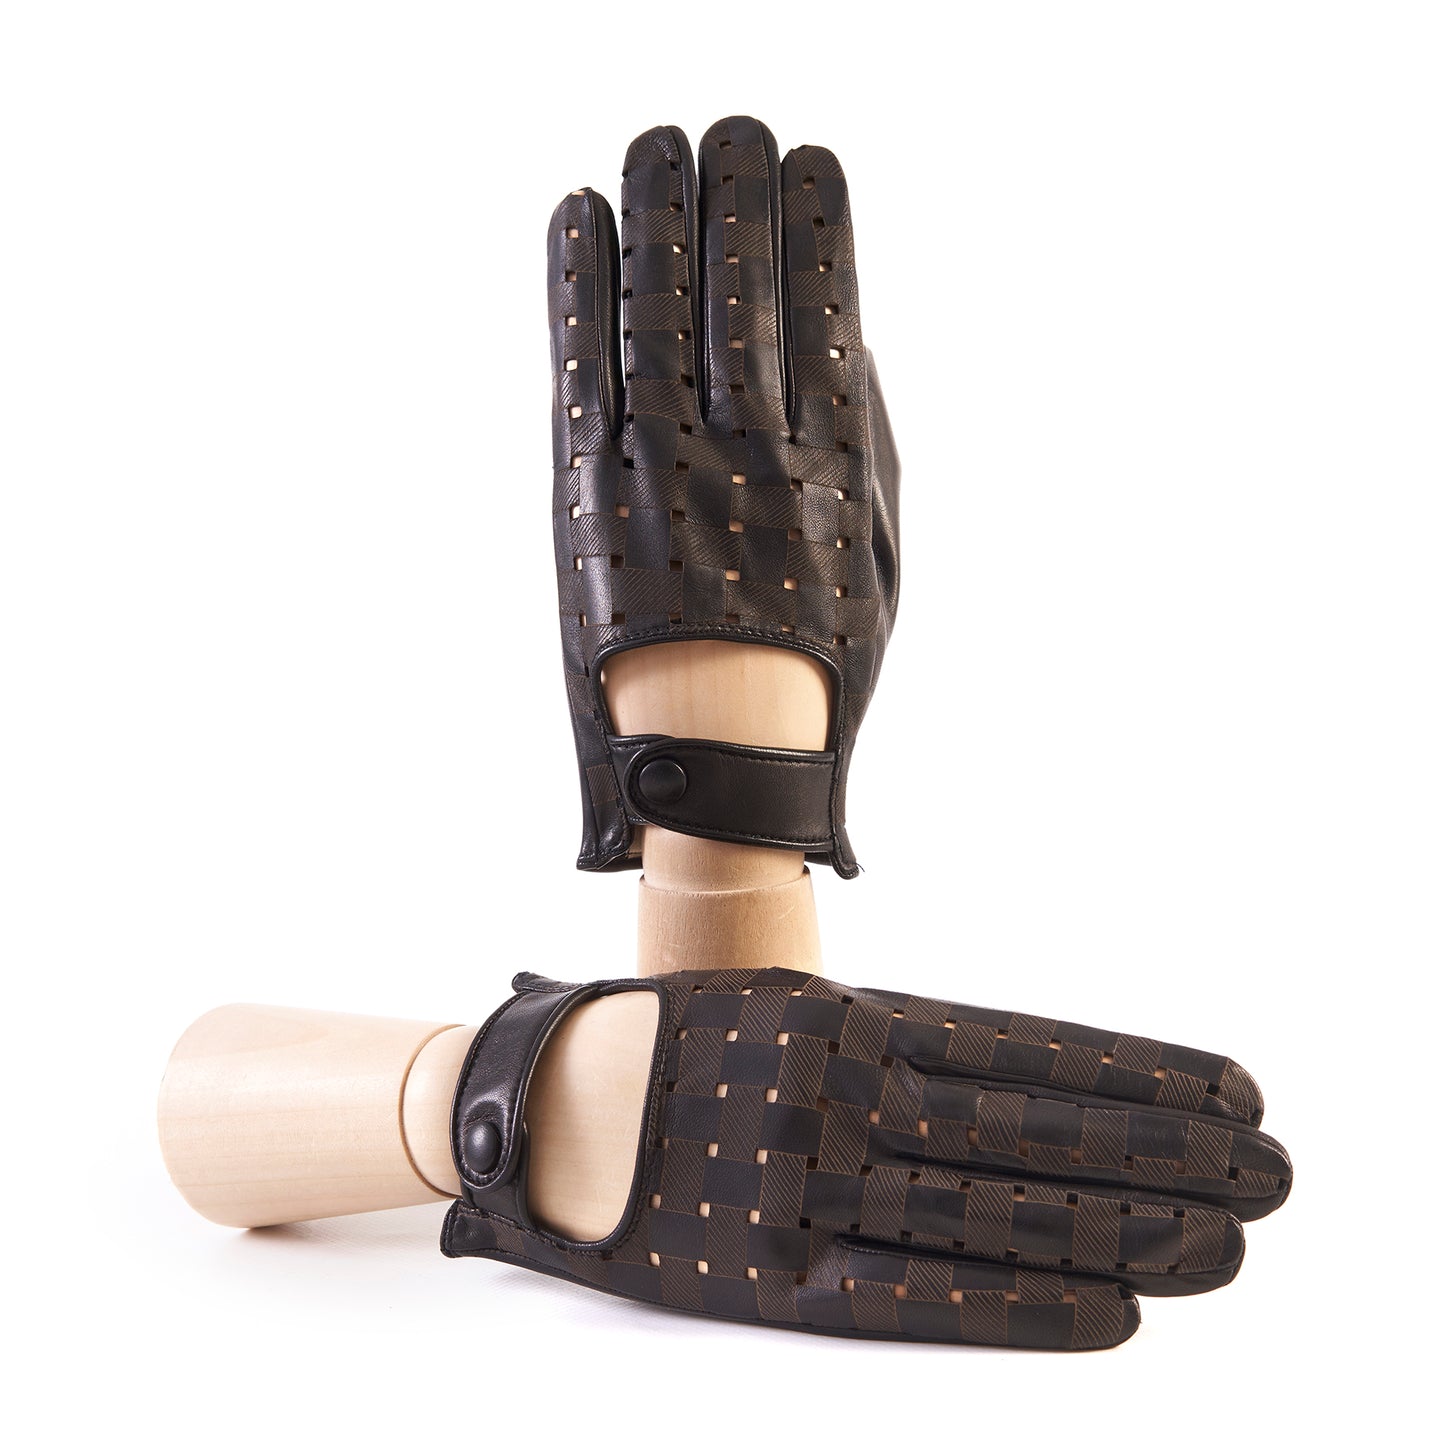 Men's black nappa leather driving gloves with laser-cut details